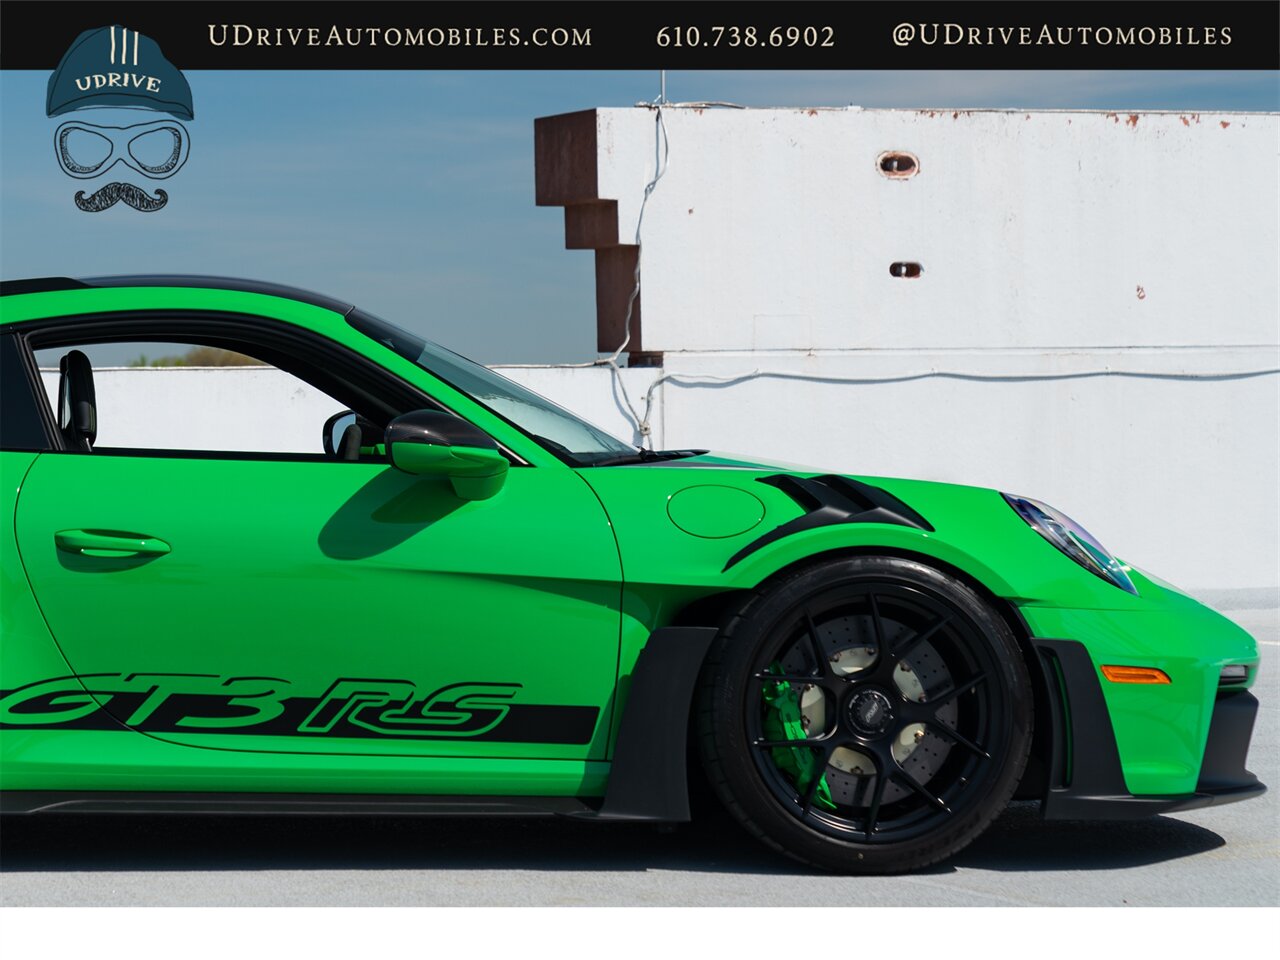 2023 Porsche 911 GT3 RS  Weissach Pkg FAL Full Body PPF $43k in Extras - Photo 20 - West Chester, PA 19382